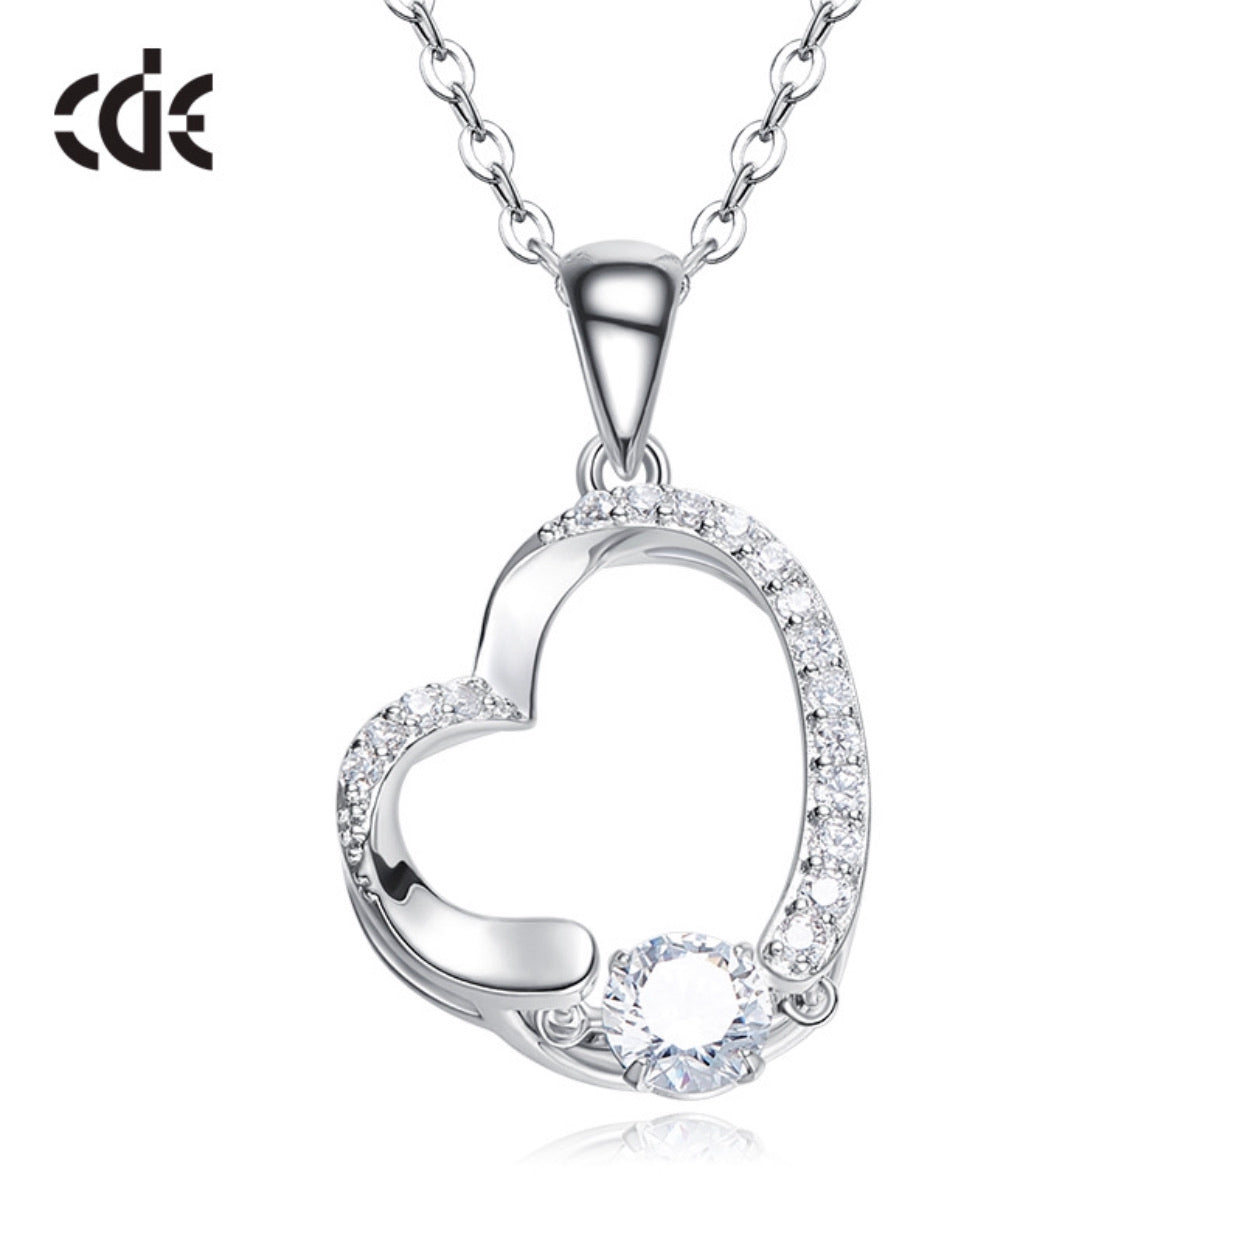 Sterling silver heart dancing crystal necklace - CDE Jewelry Egypt